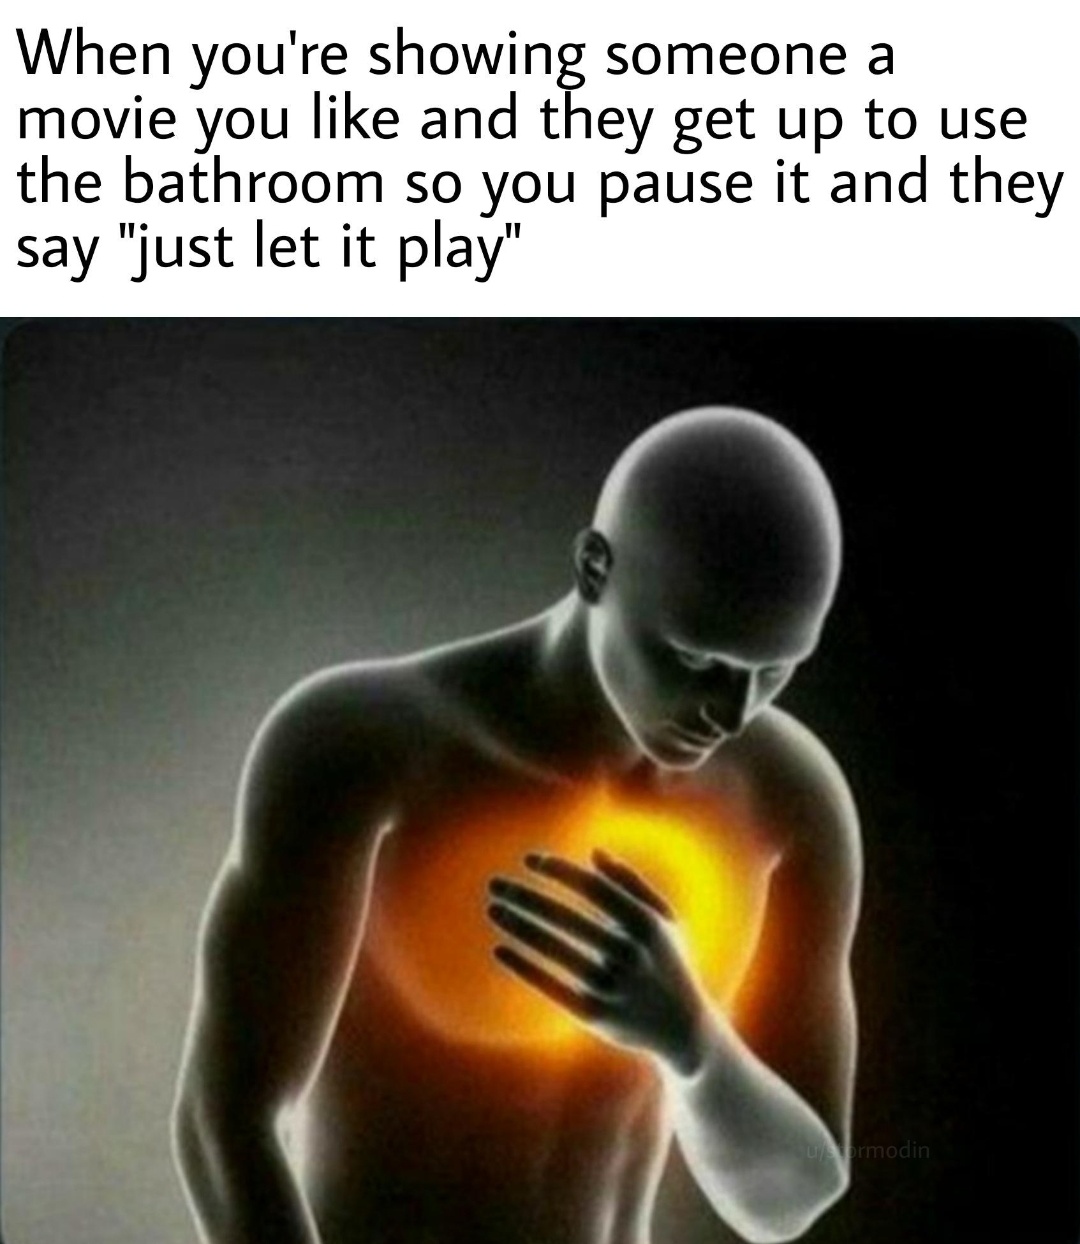 dank memes - chest pain - When you're showing someone a movie you and they get up to use the bathroom so you pause it and they say